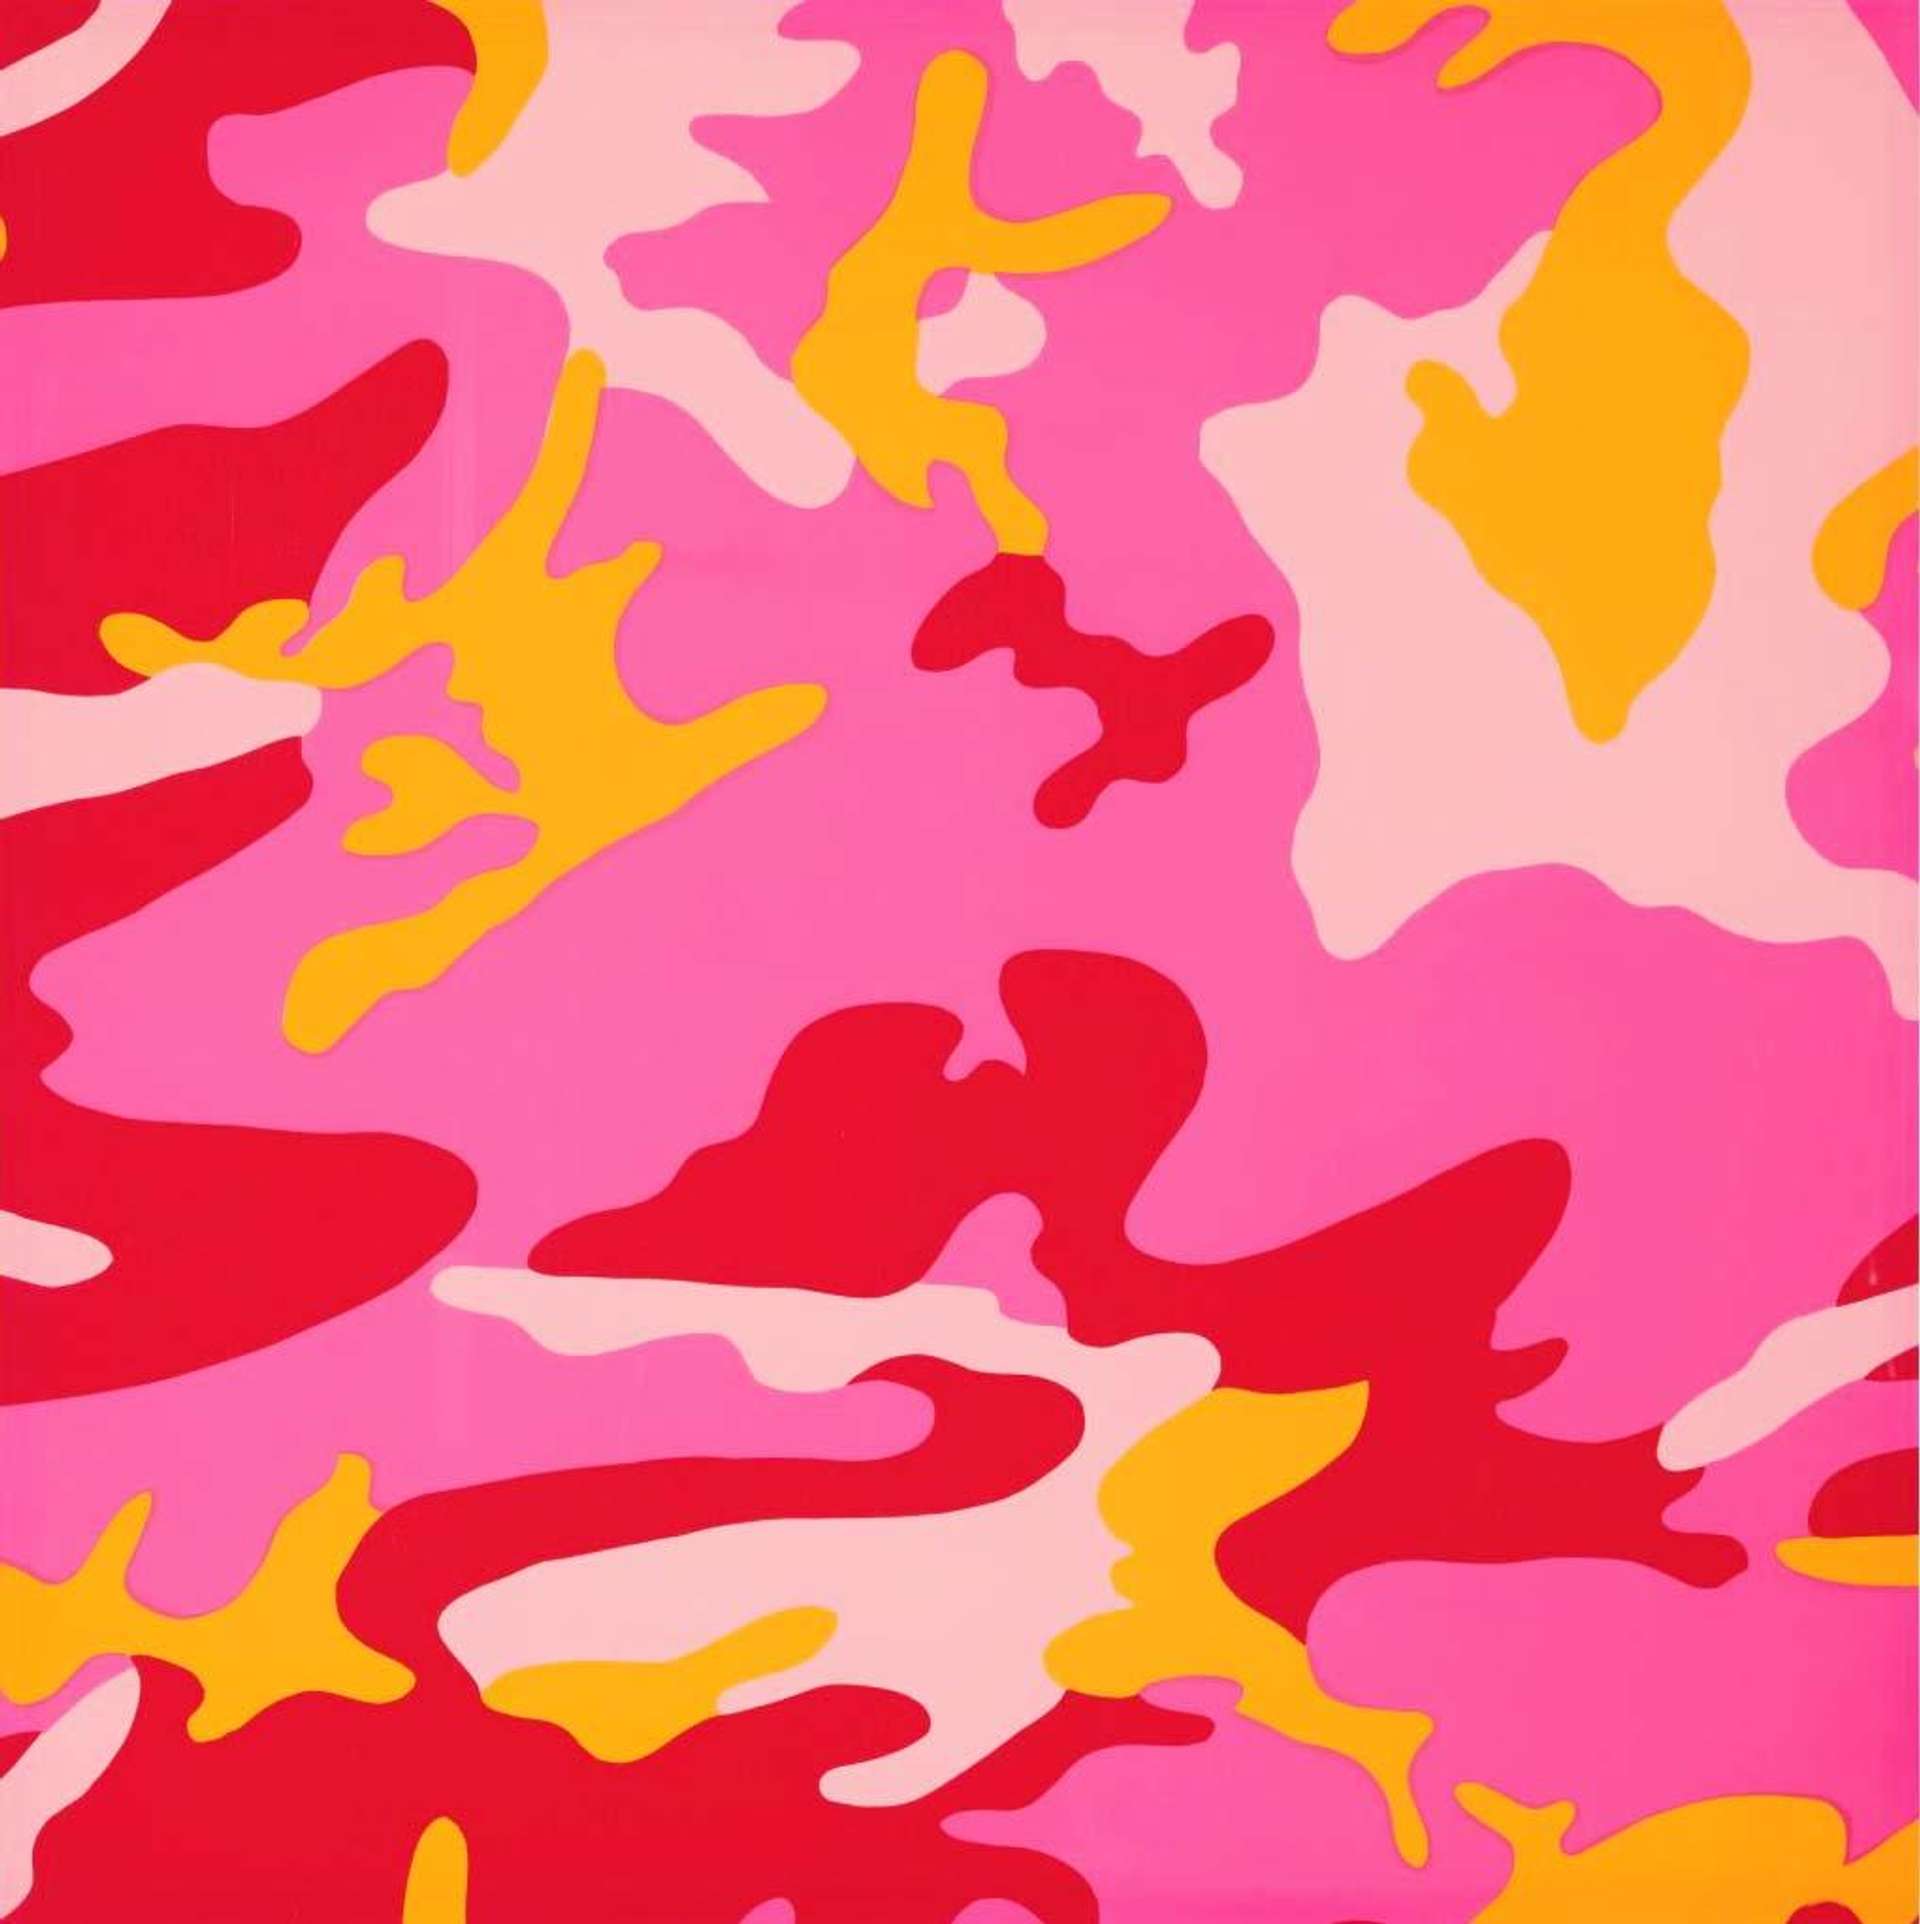 Camouflage (F. & S. II.408) by Andy Warhol